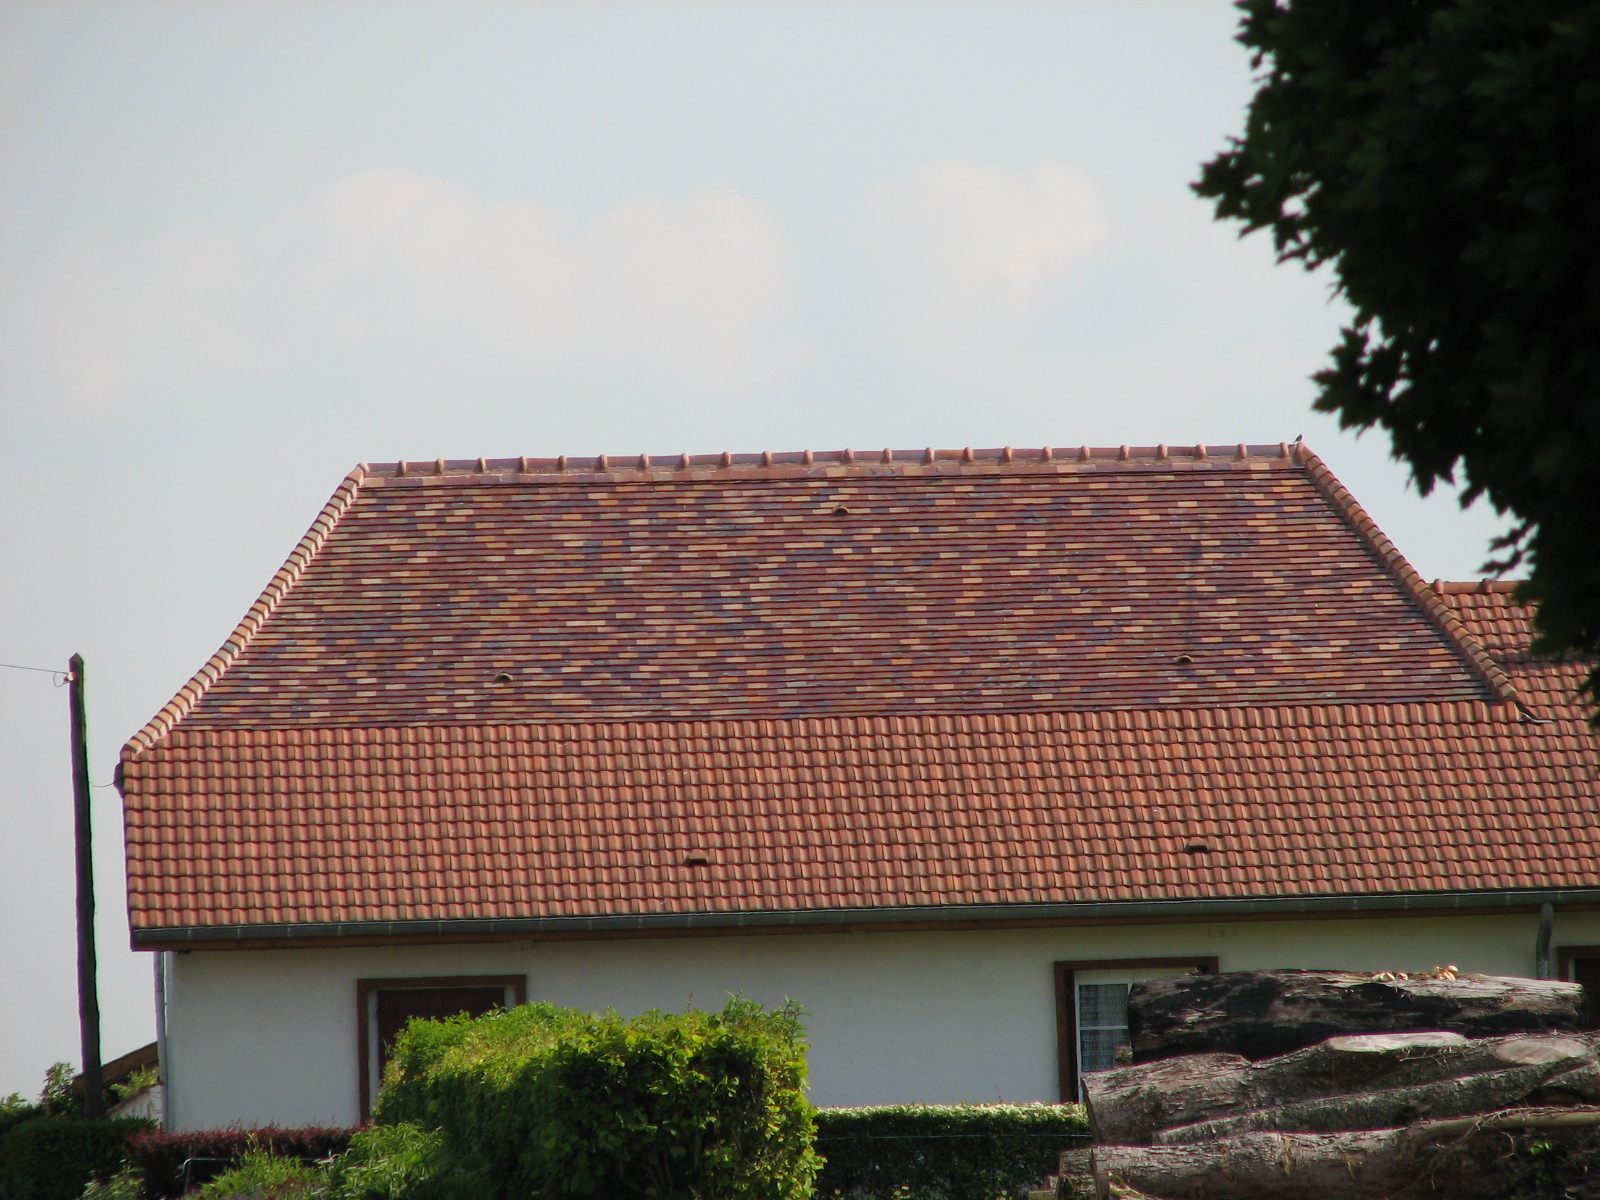 the roof of a house that is tiled with red clay